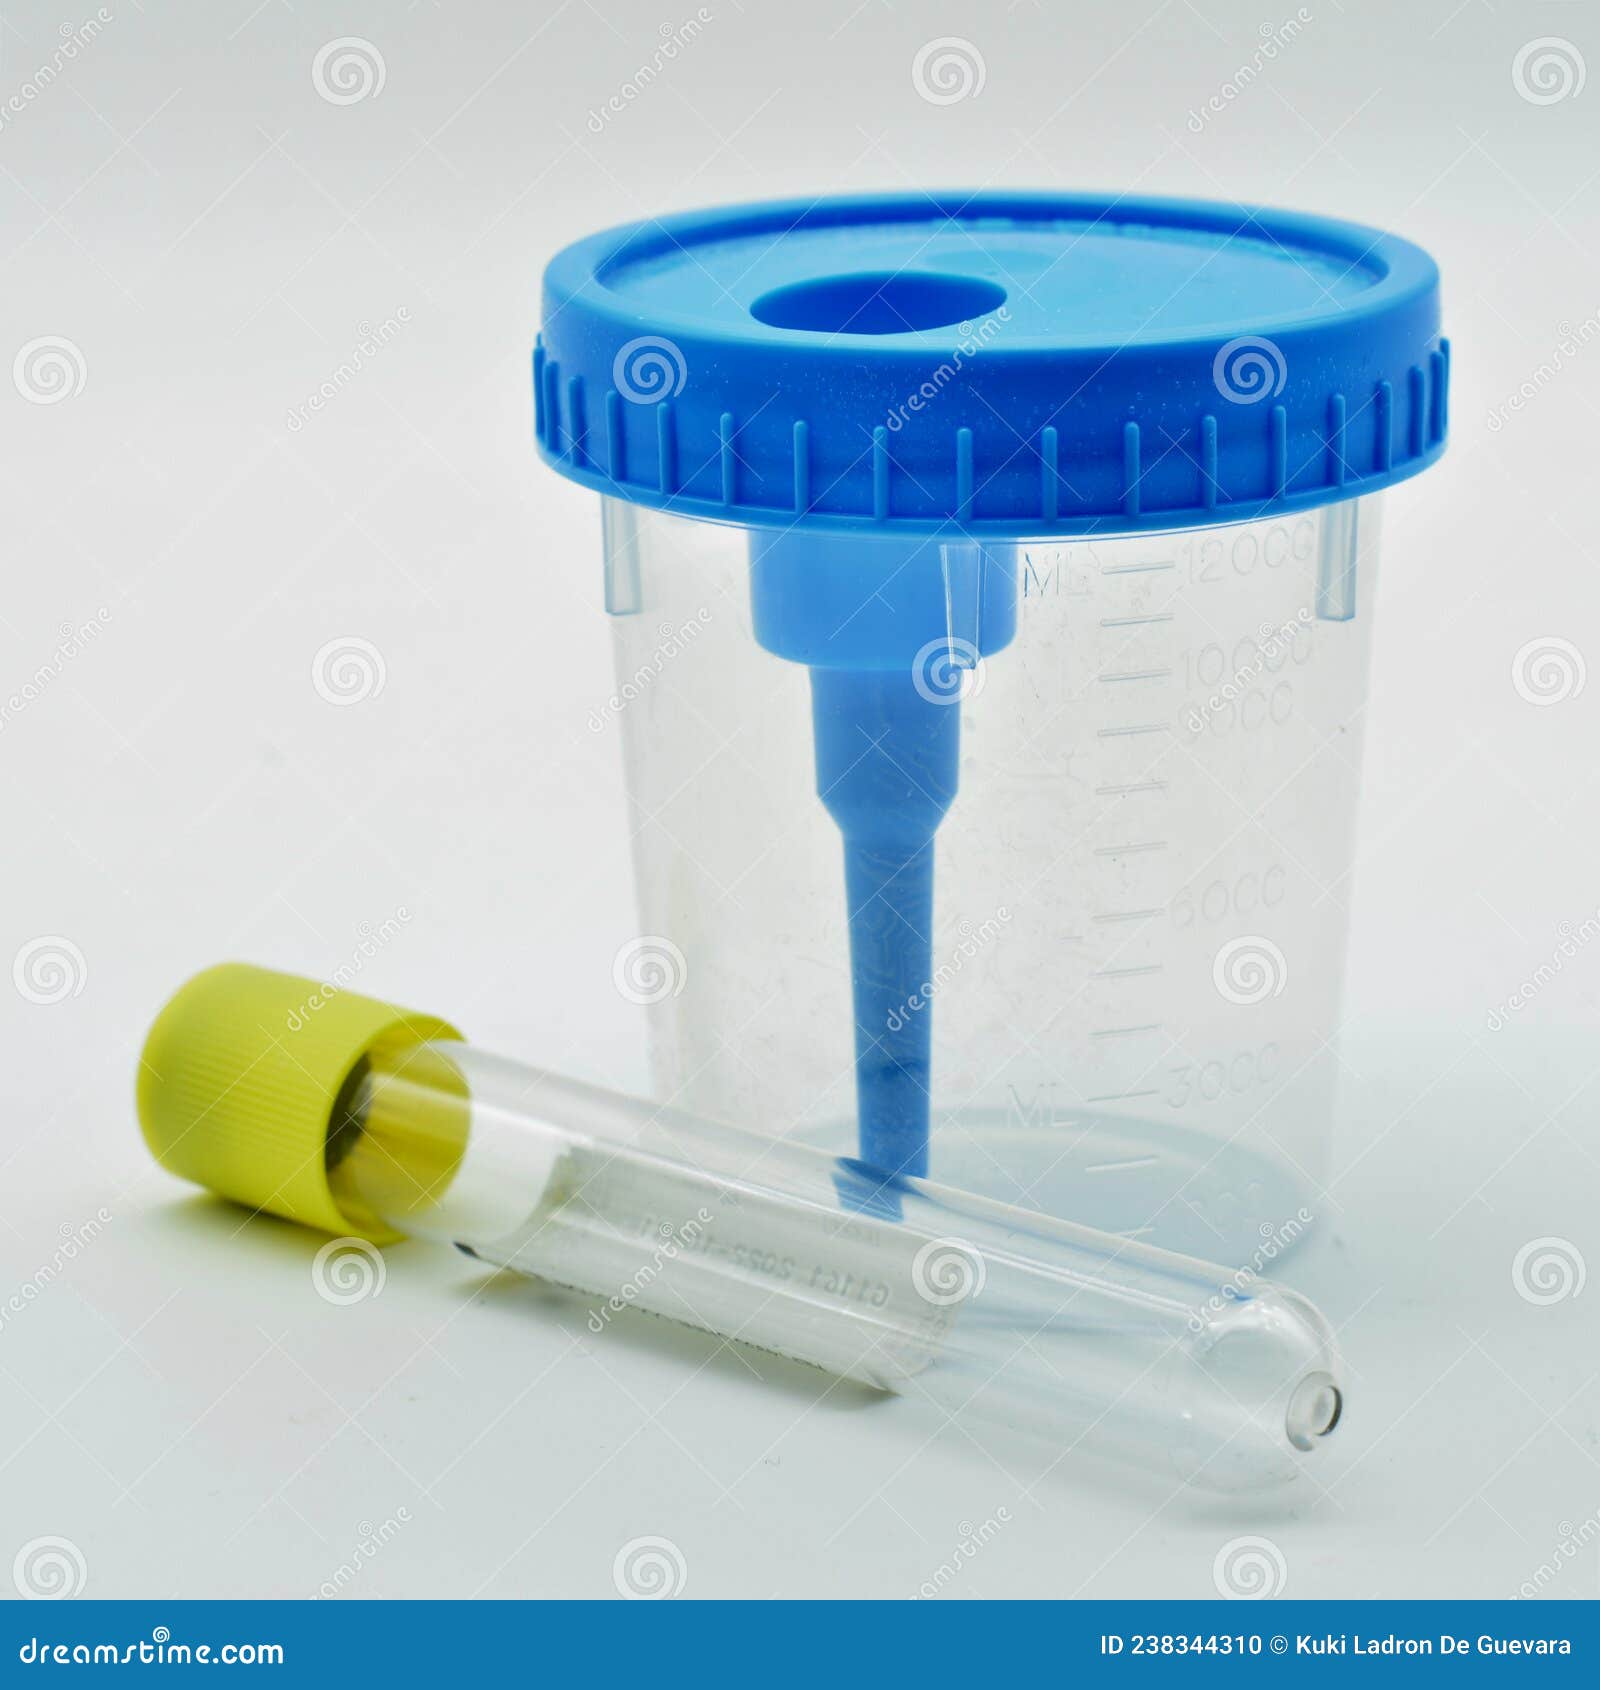 urinalysis containers,  on white background